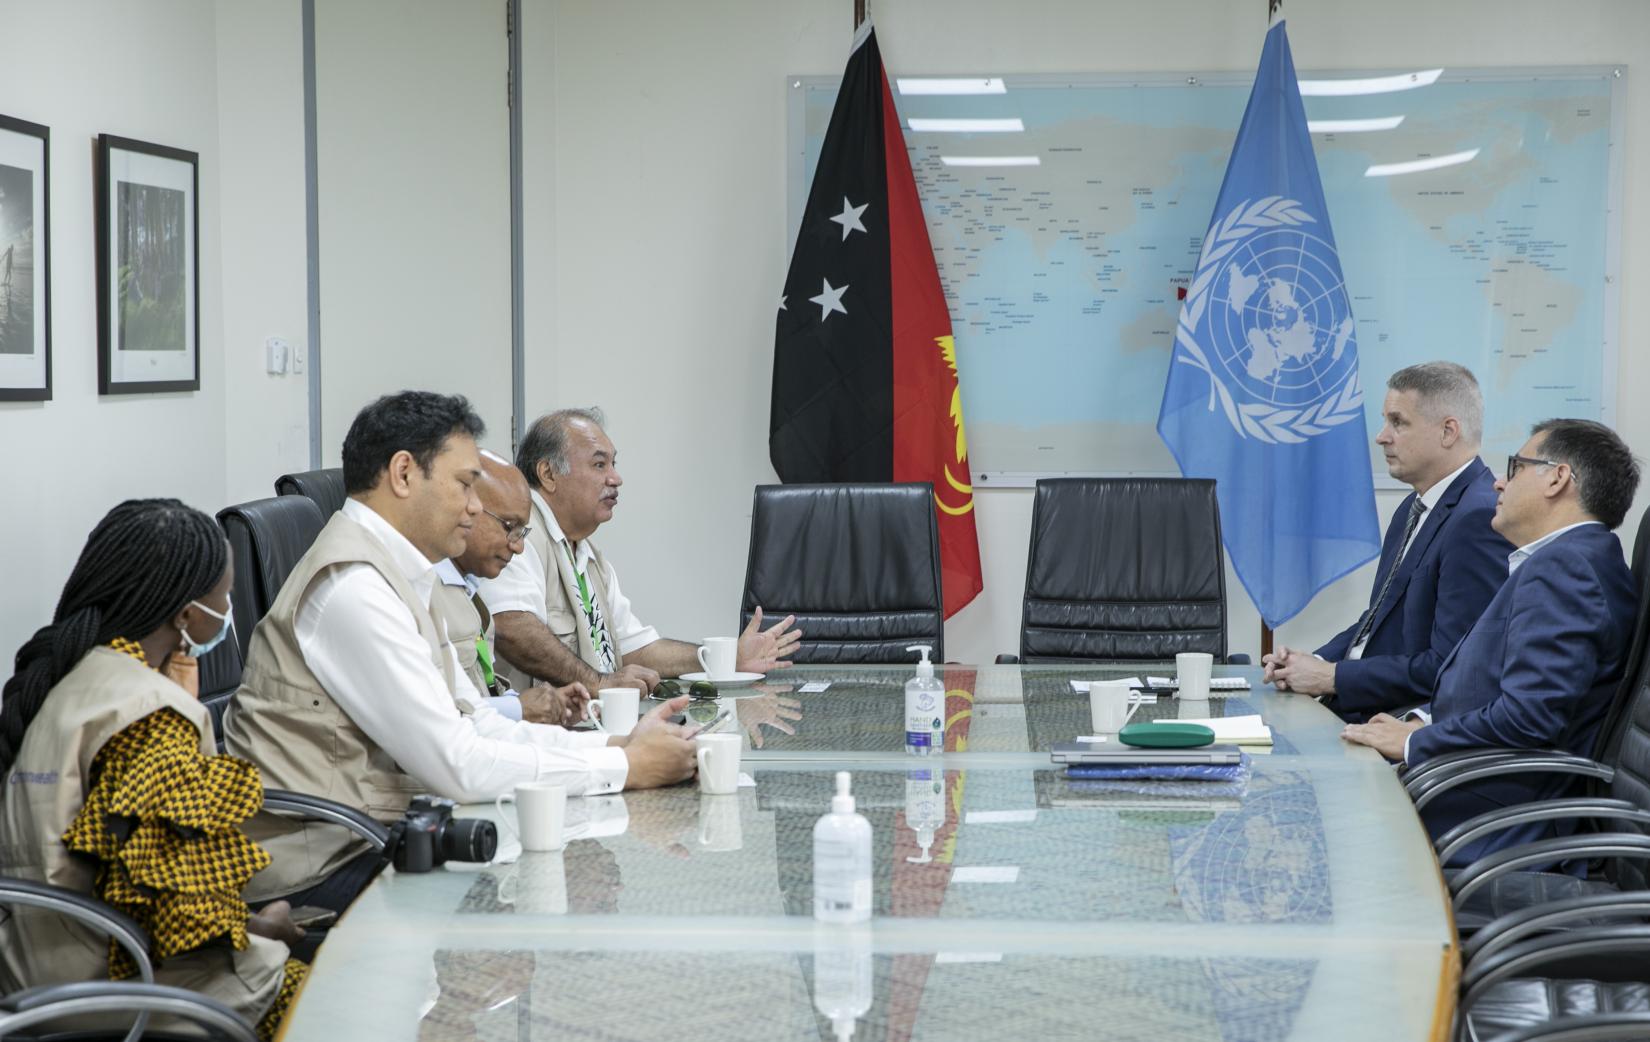 UN Resident Coordinator a.i. Mr. Dirk Wagener, met with the Commonwealth Secretariat Observer Group that is currently in Papua New Guinea to observe the 2022 General Elections. 